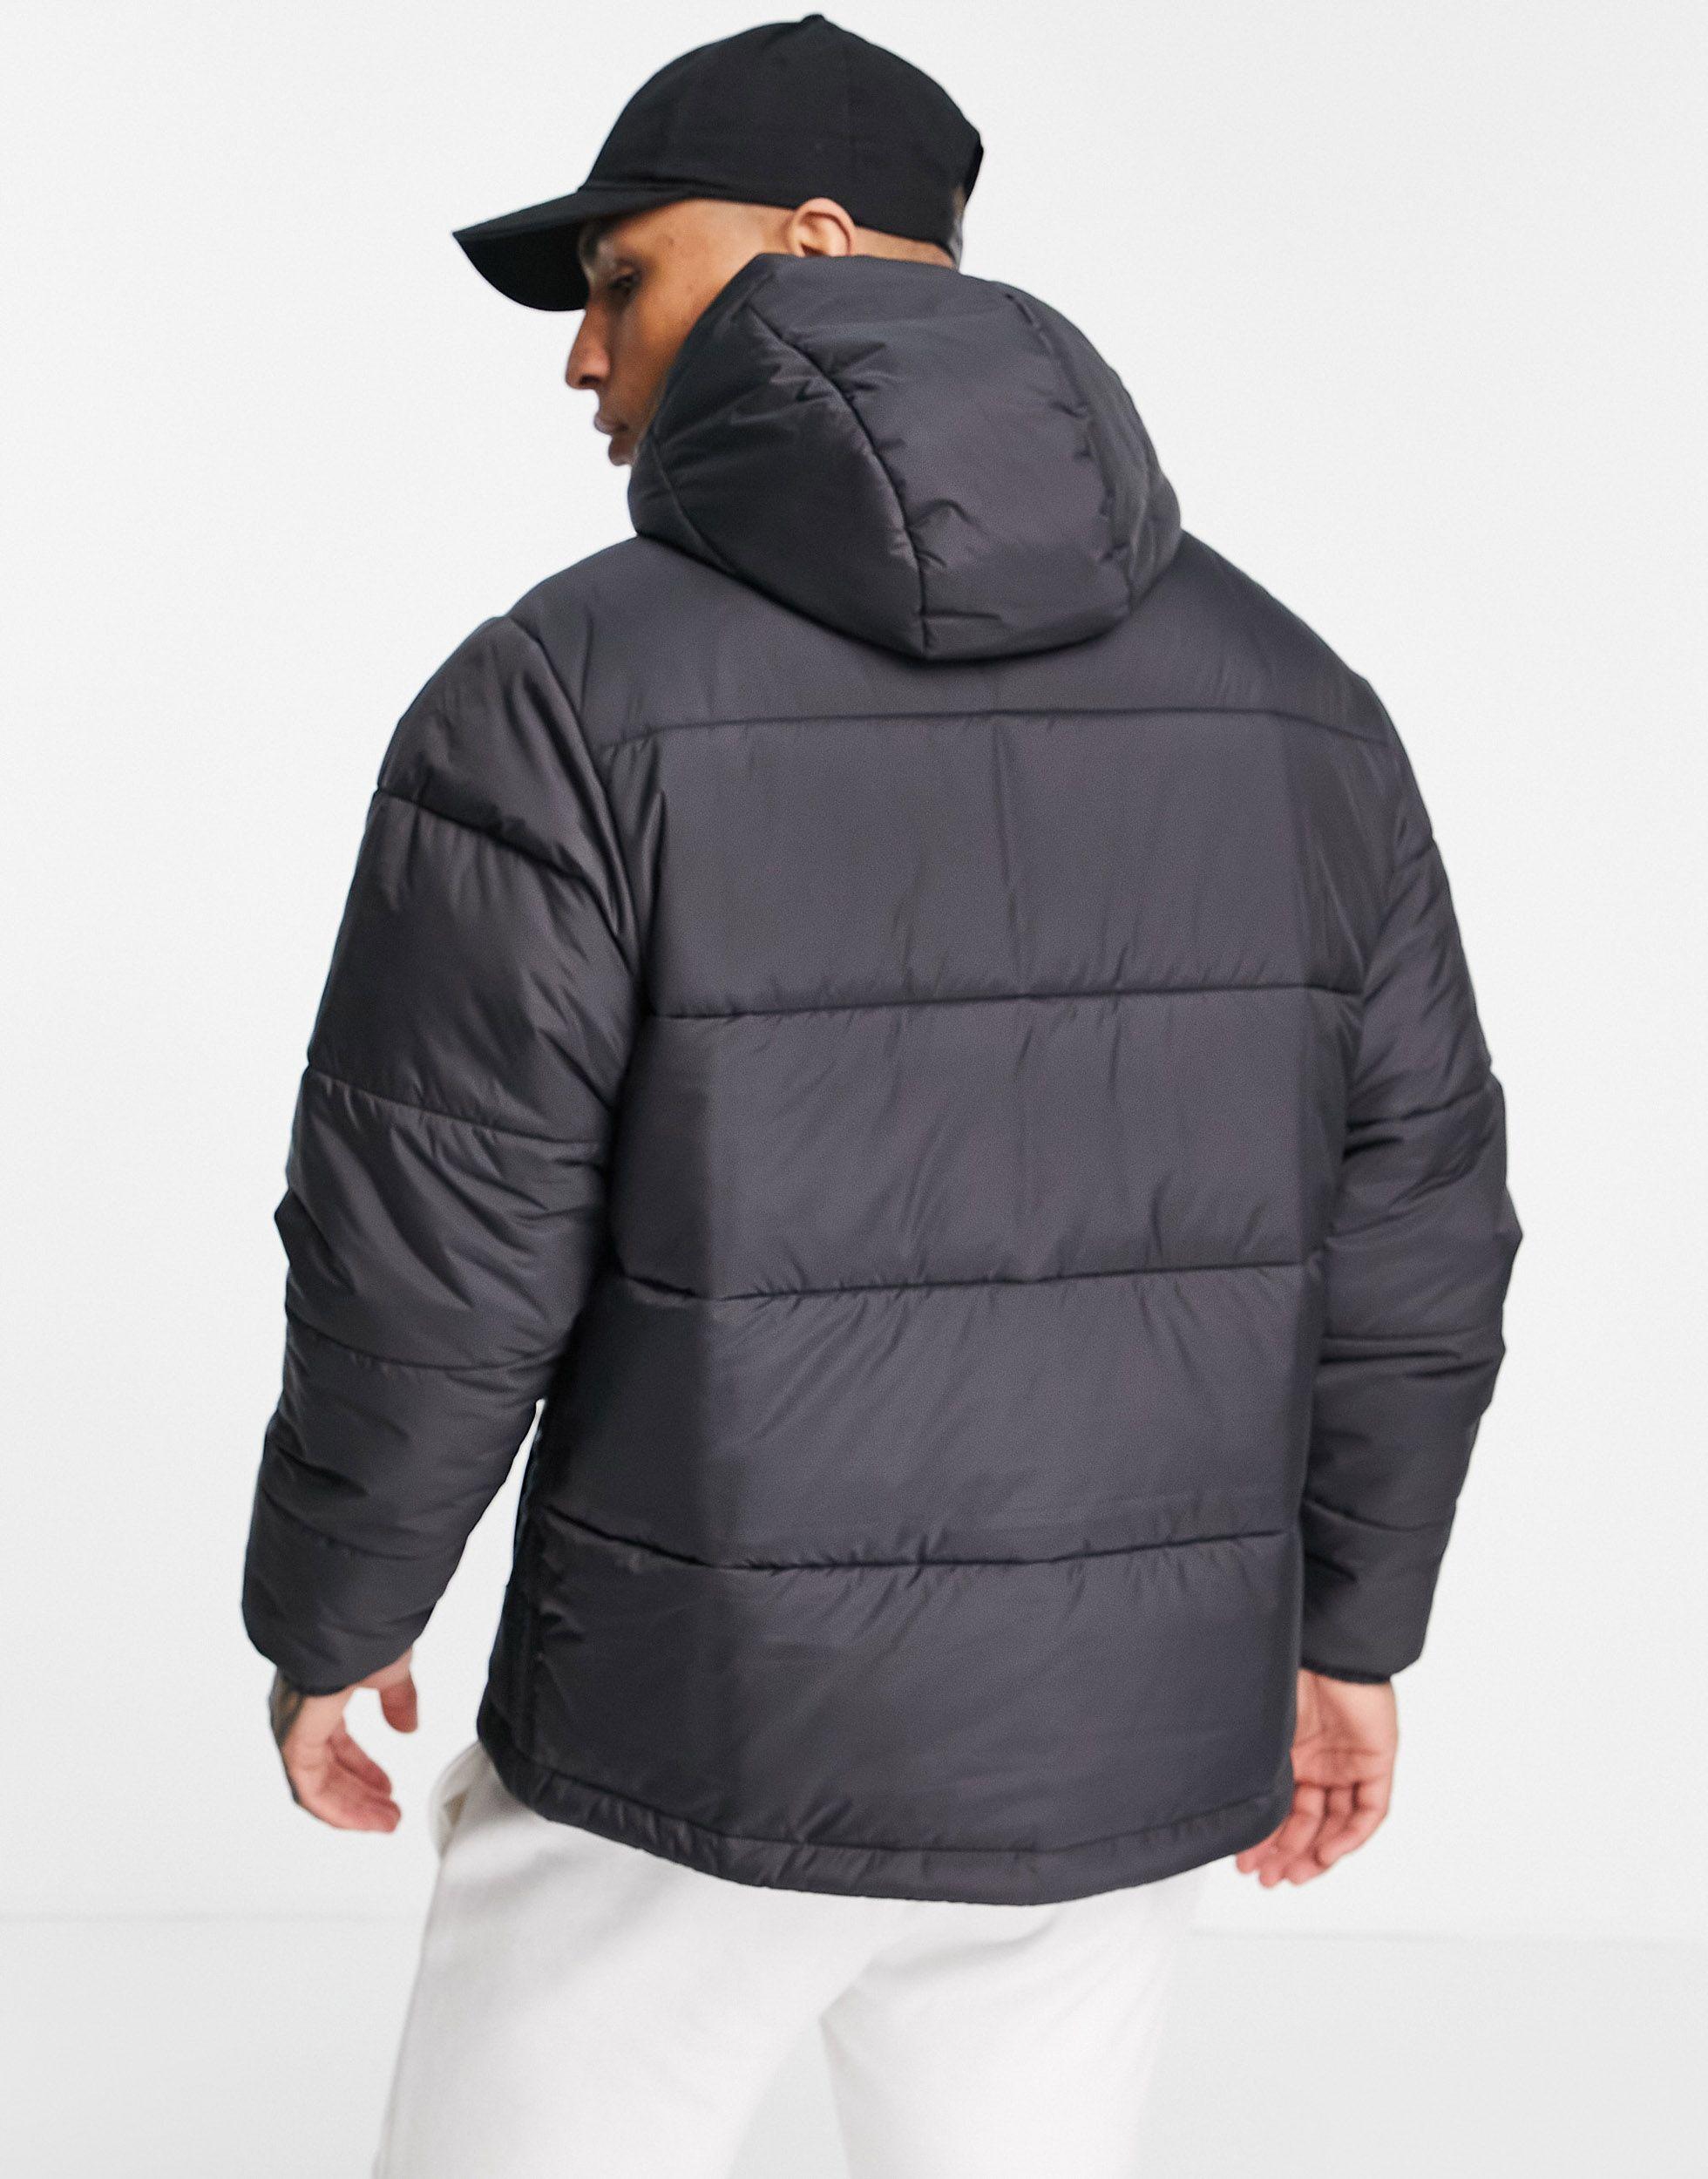 Originals 3 Stripe Padded Jacket With Hood in for | Lyst